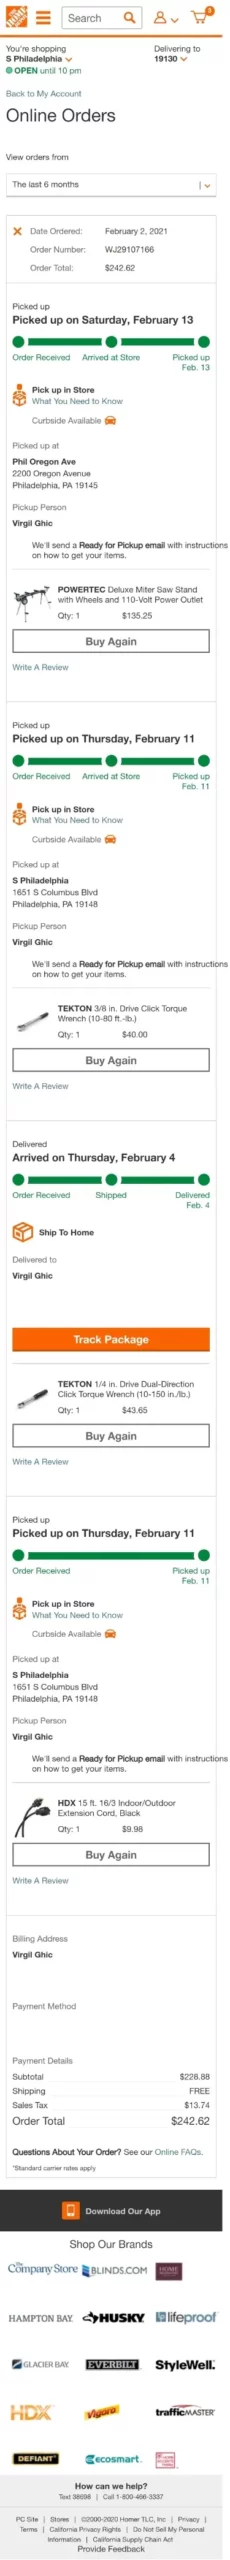 homedepot order view mobile